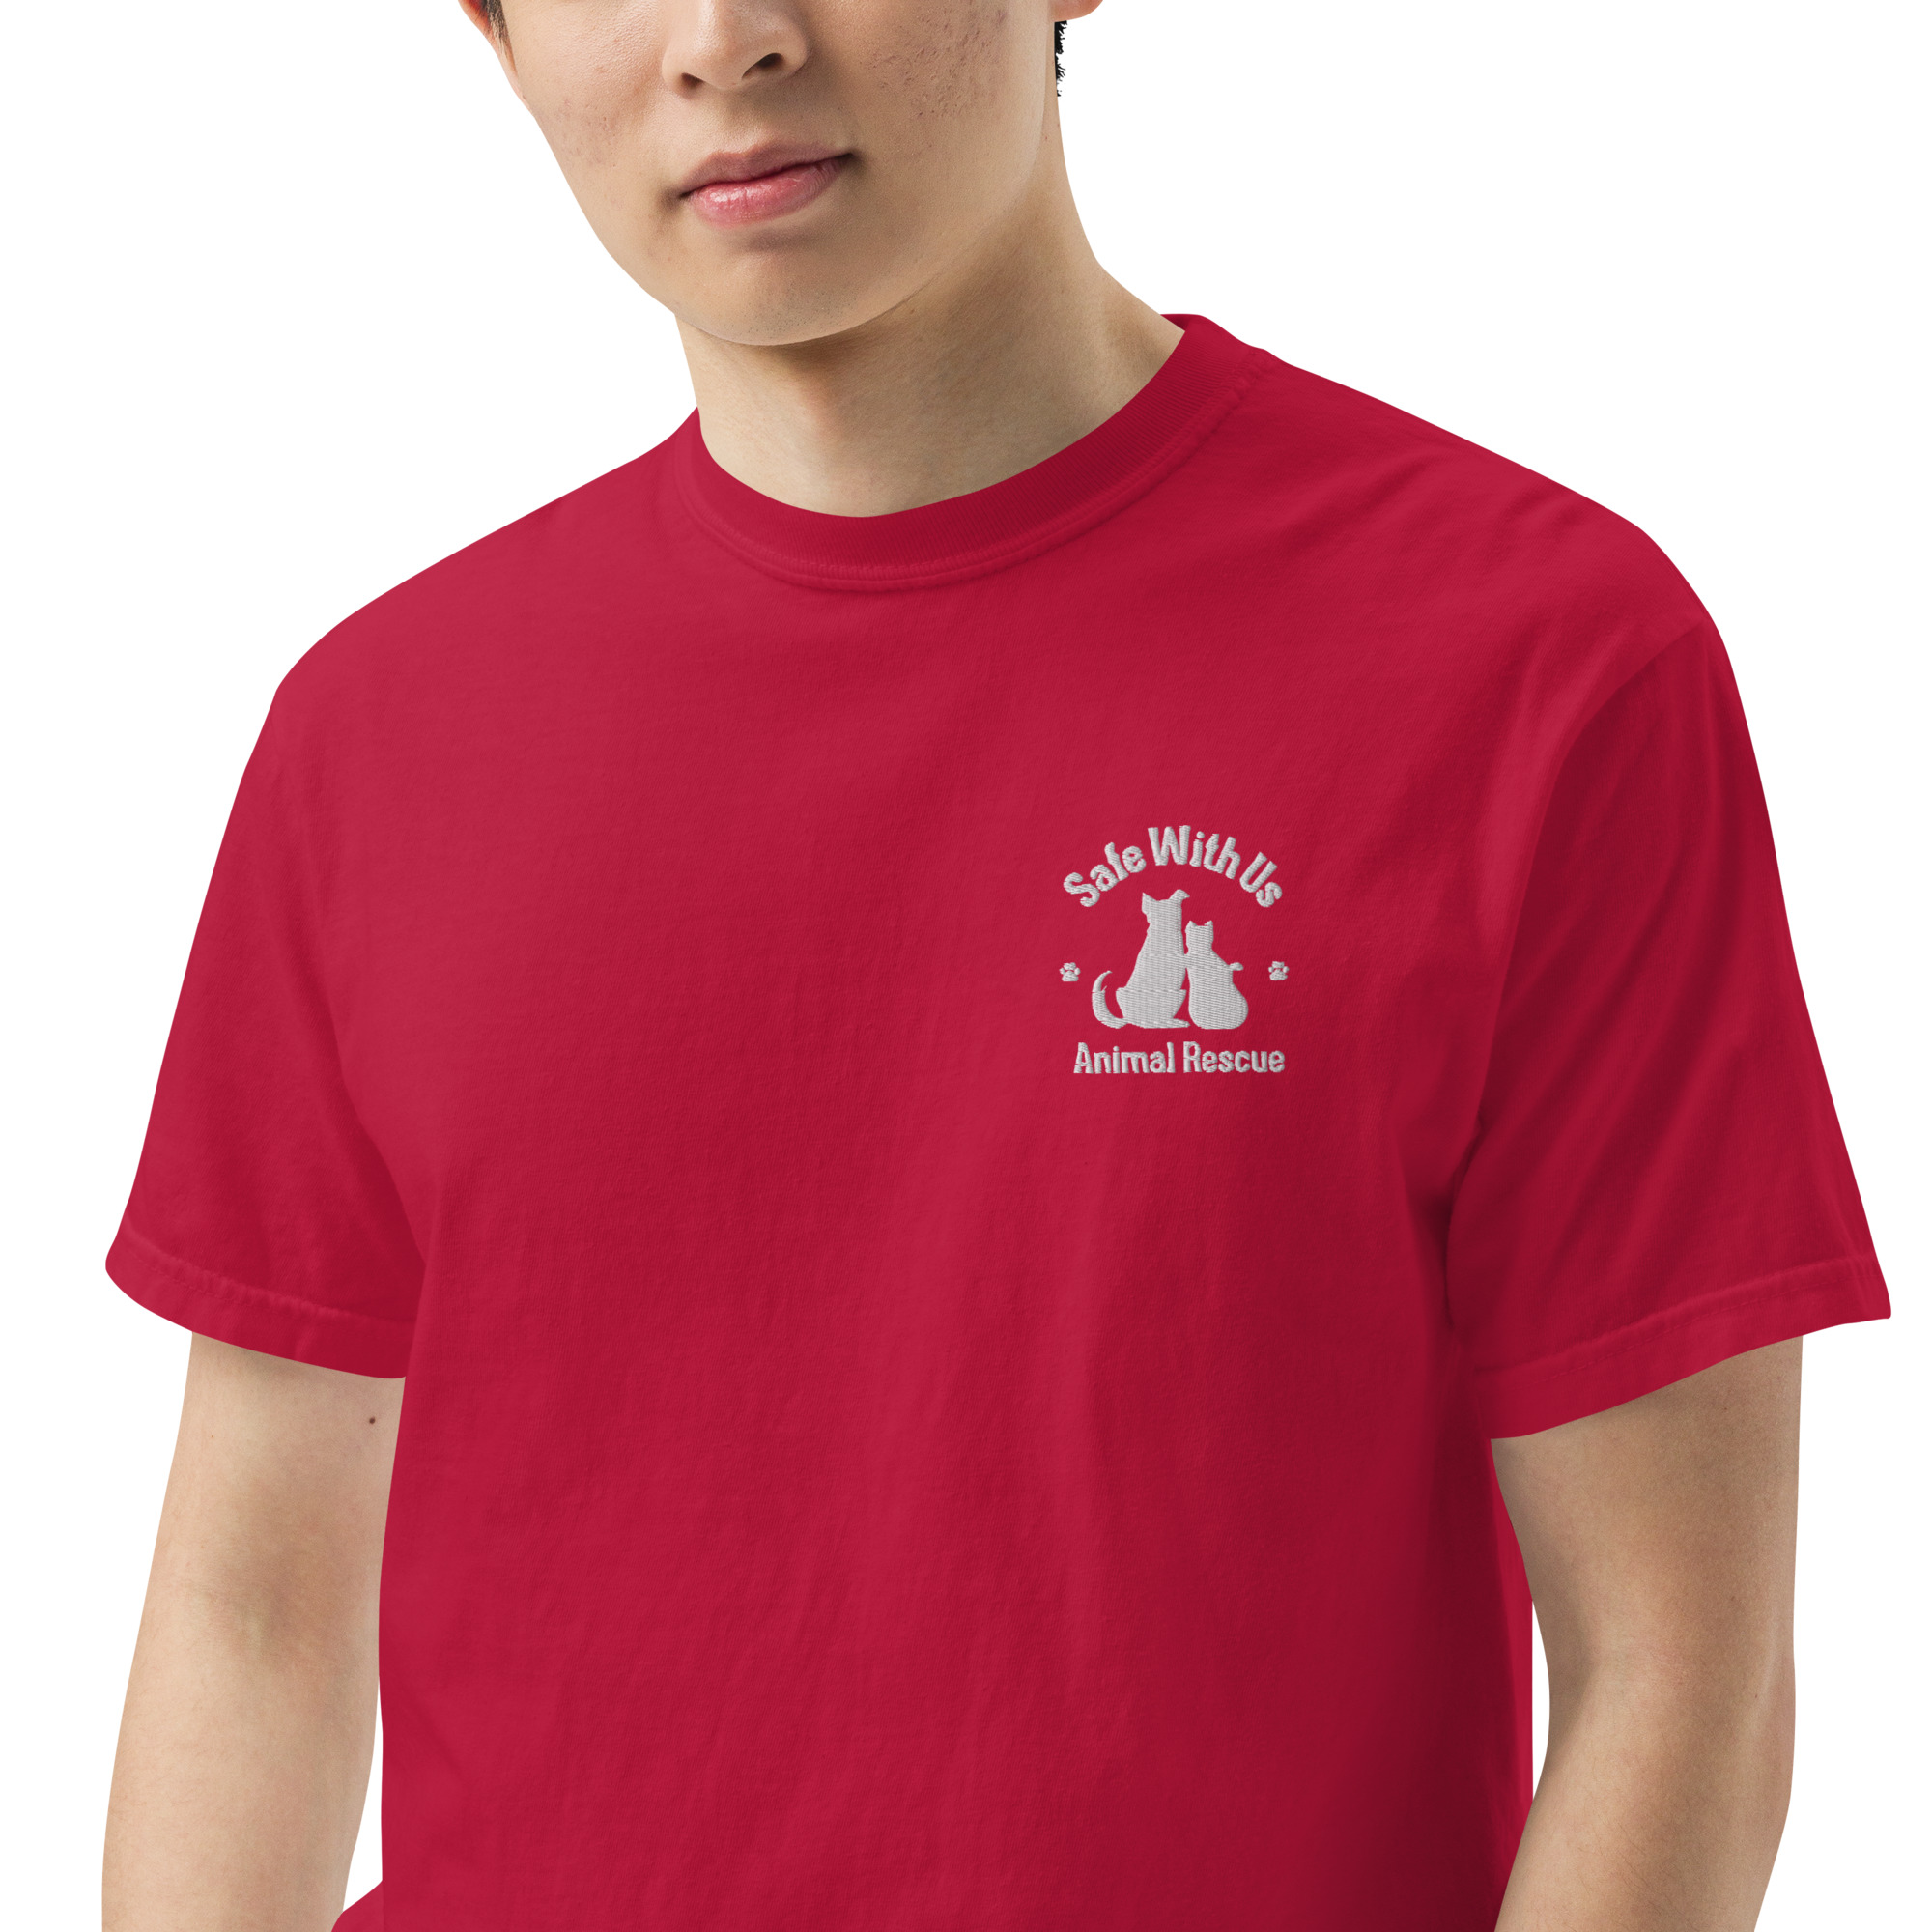 mens-garment-dyed-heavyweight-t-shirt-red-zoomed-in-3-641520bf84df8.jpg